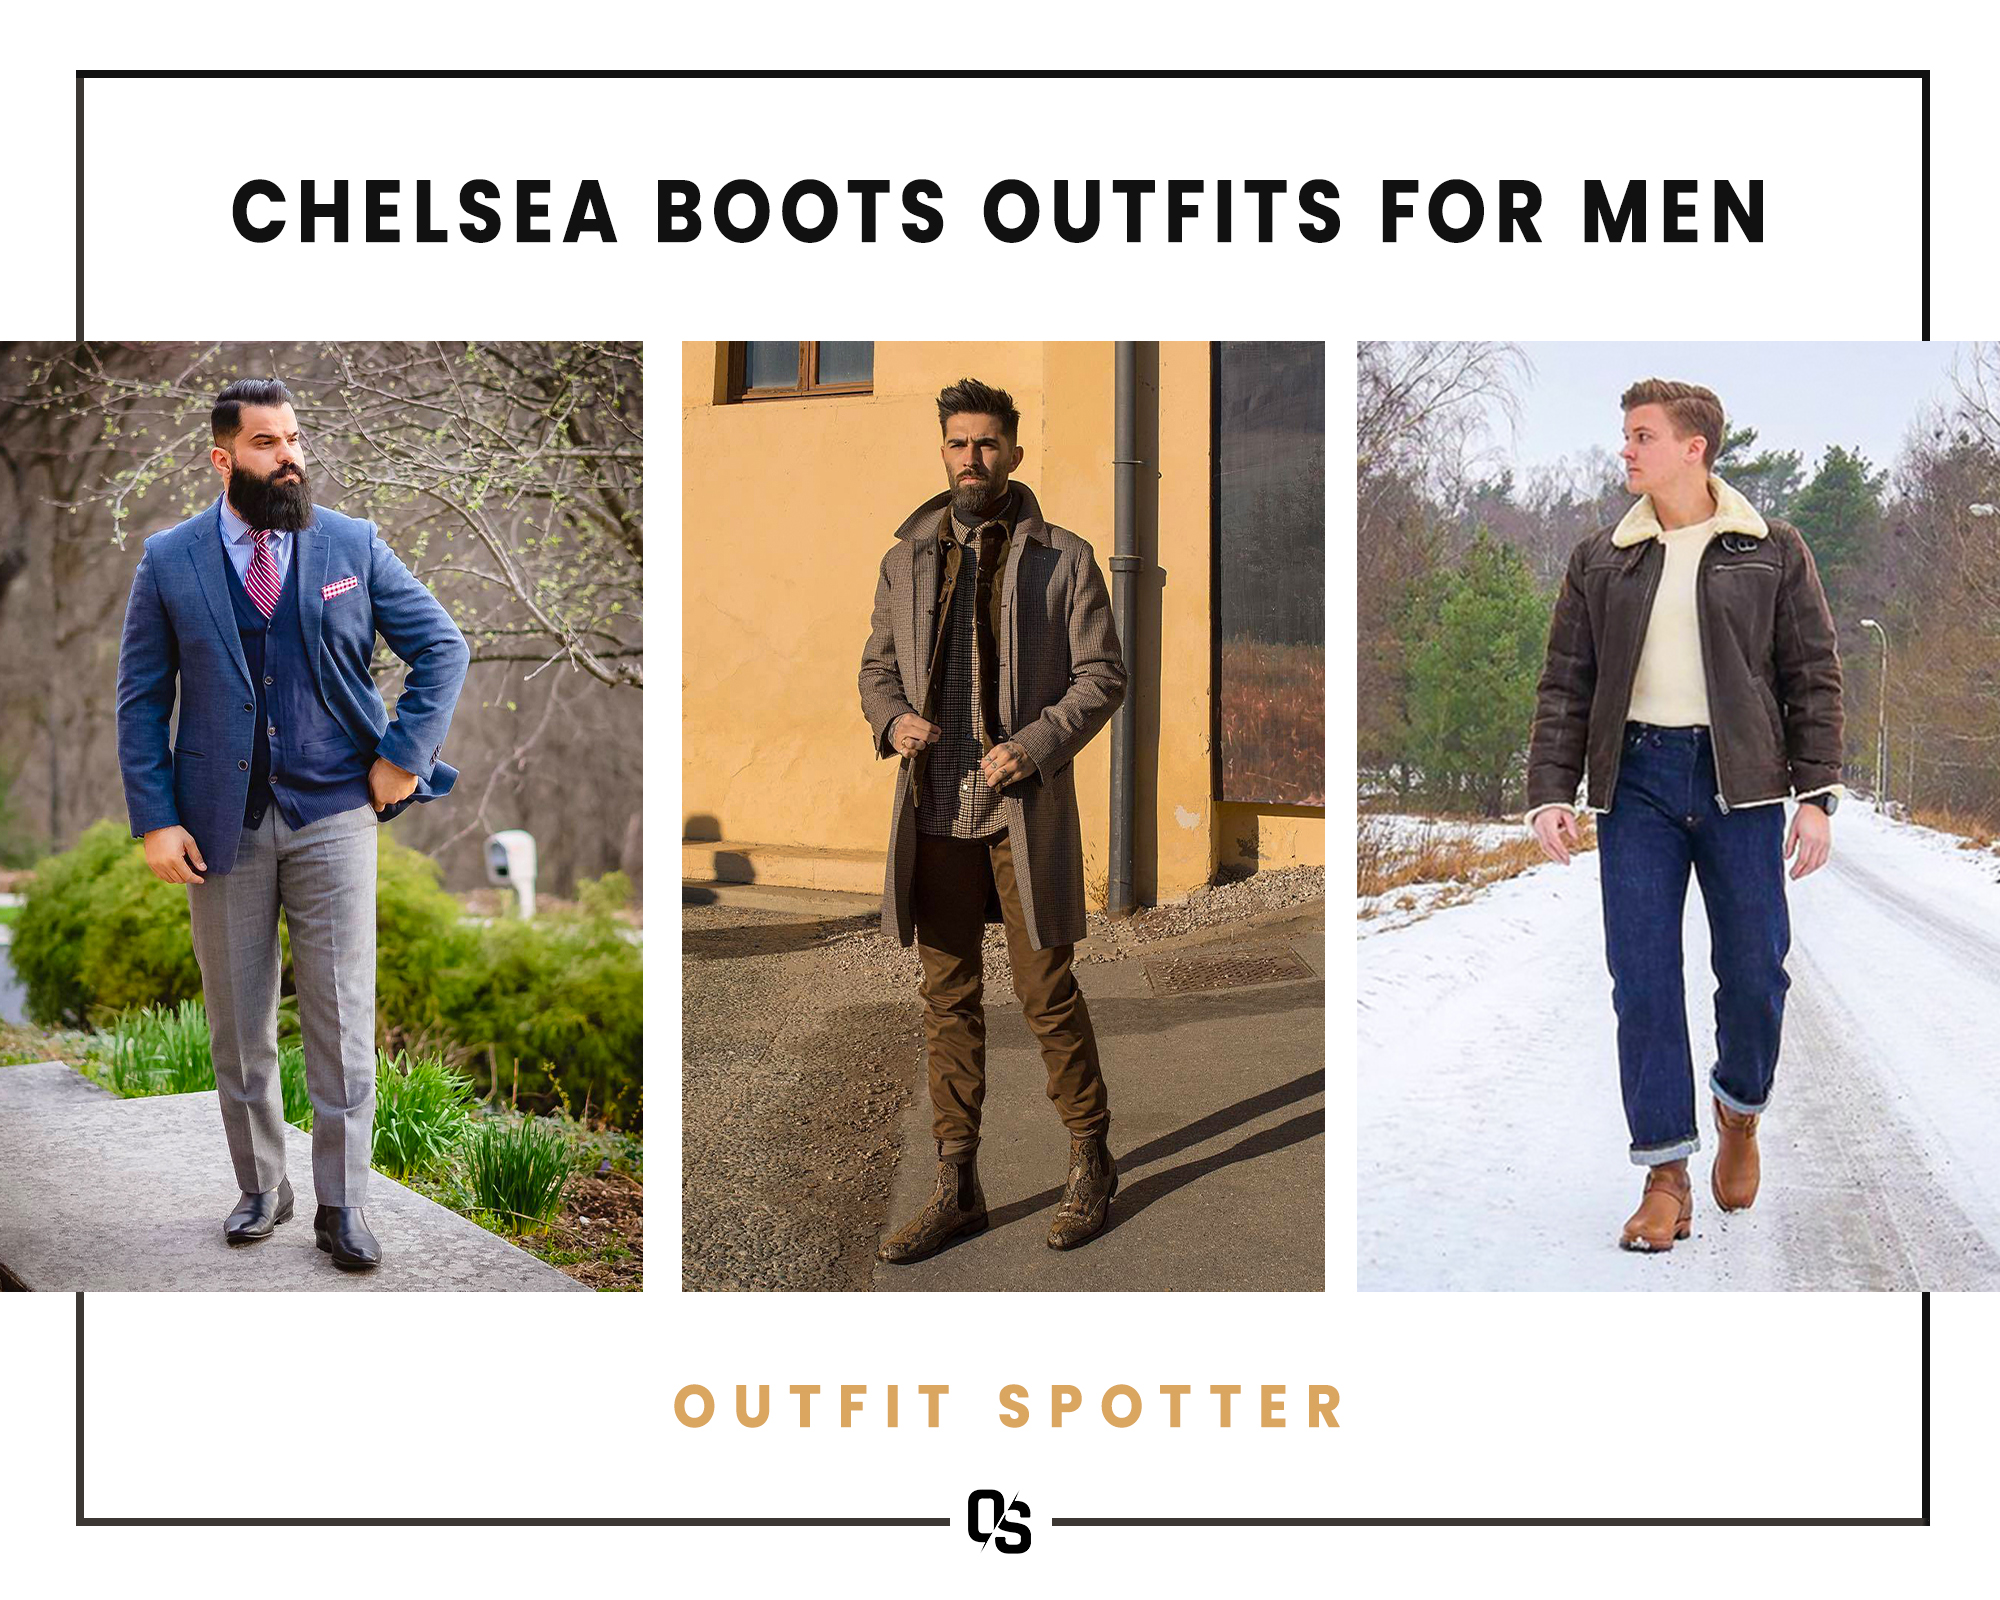 Different Chelsea boots outfits for men